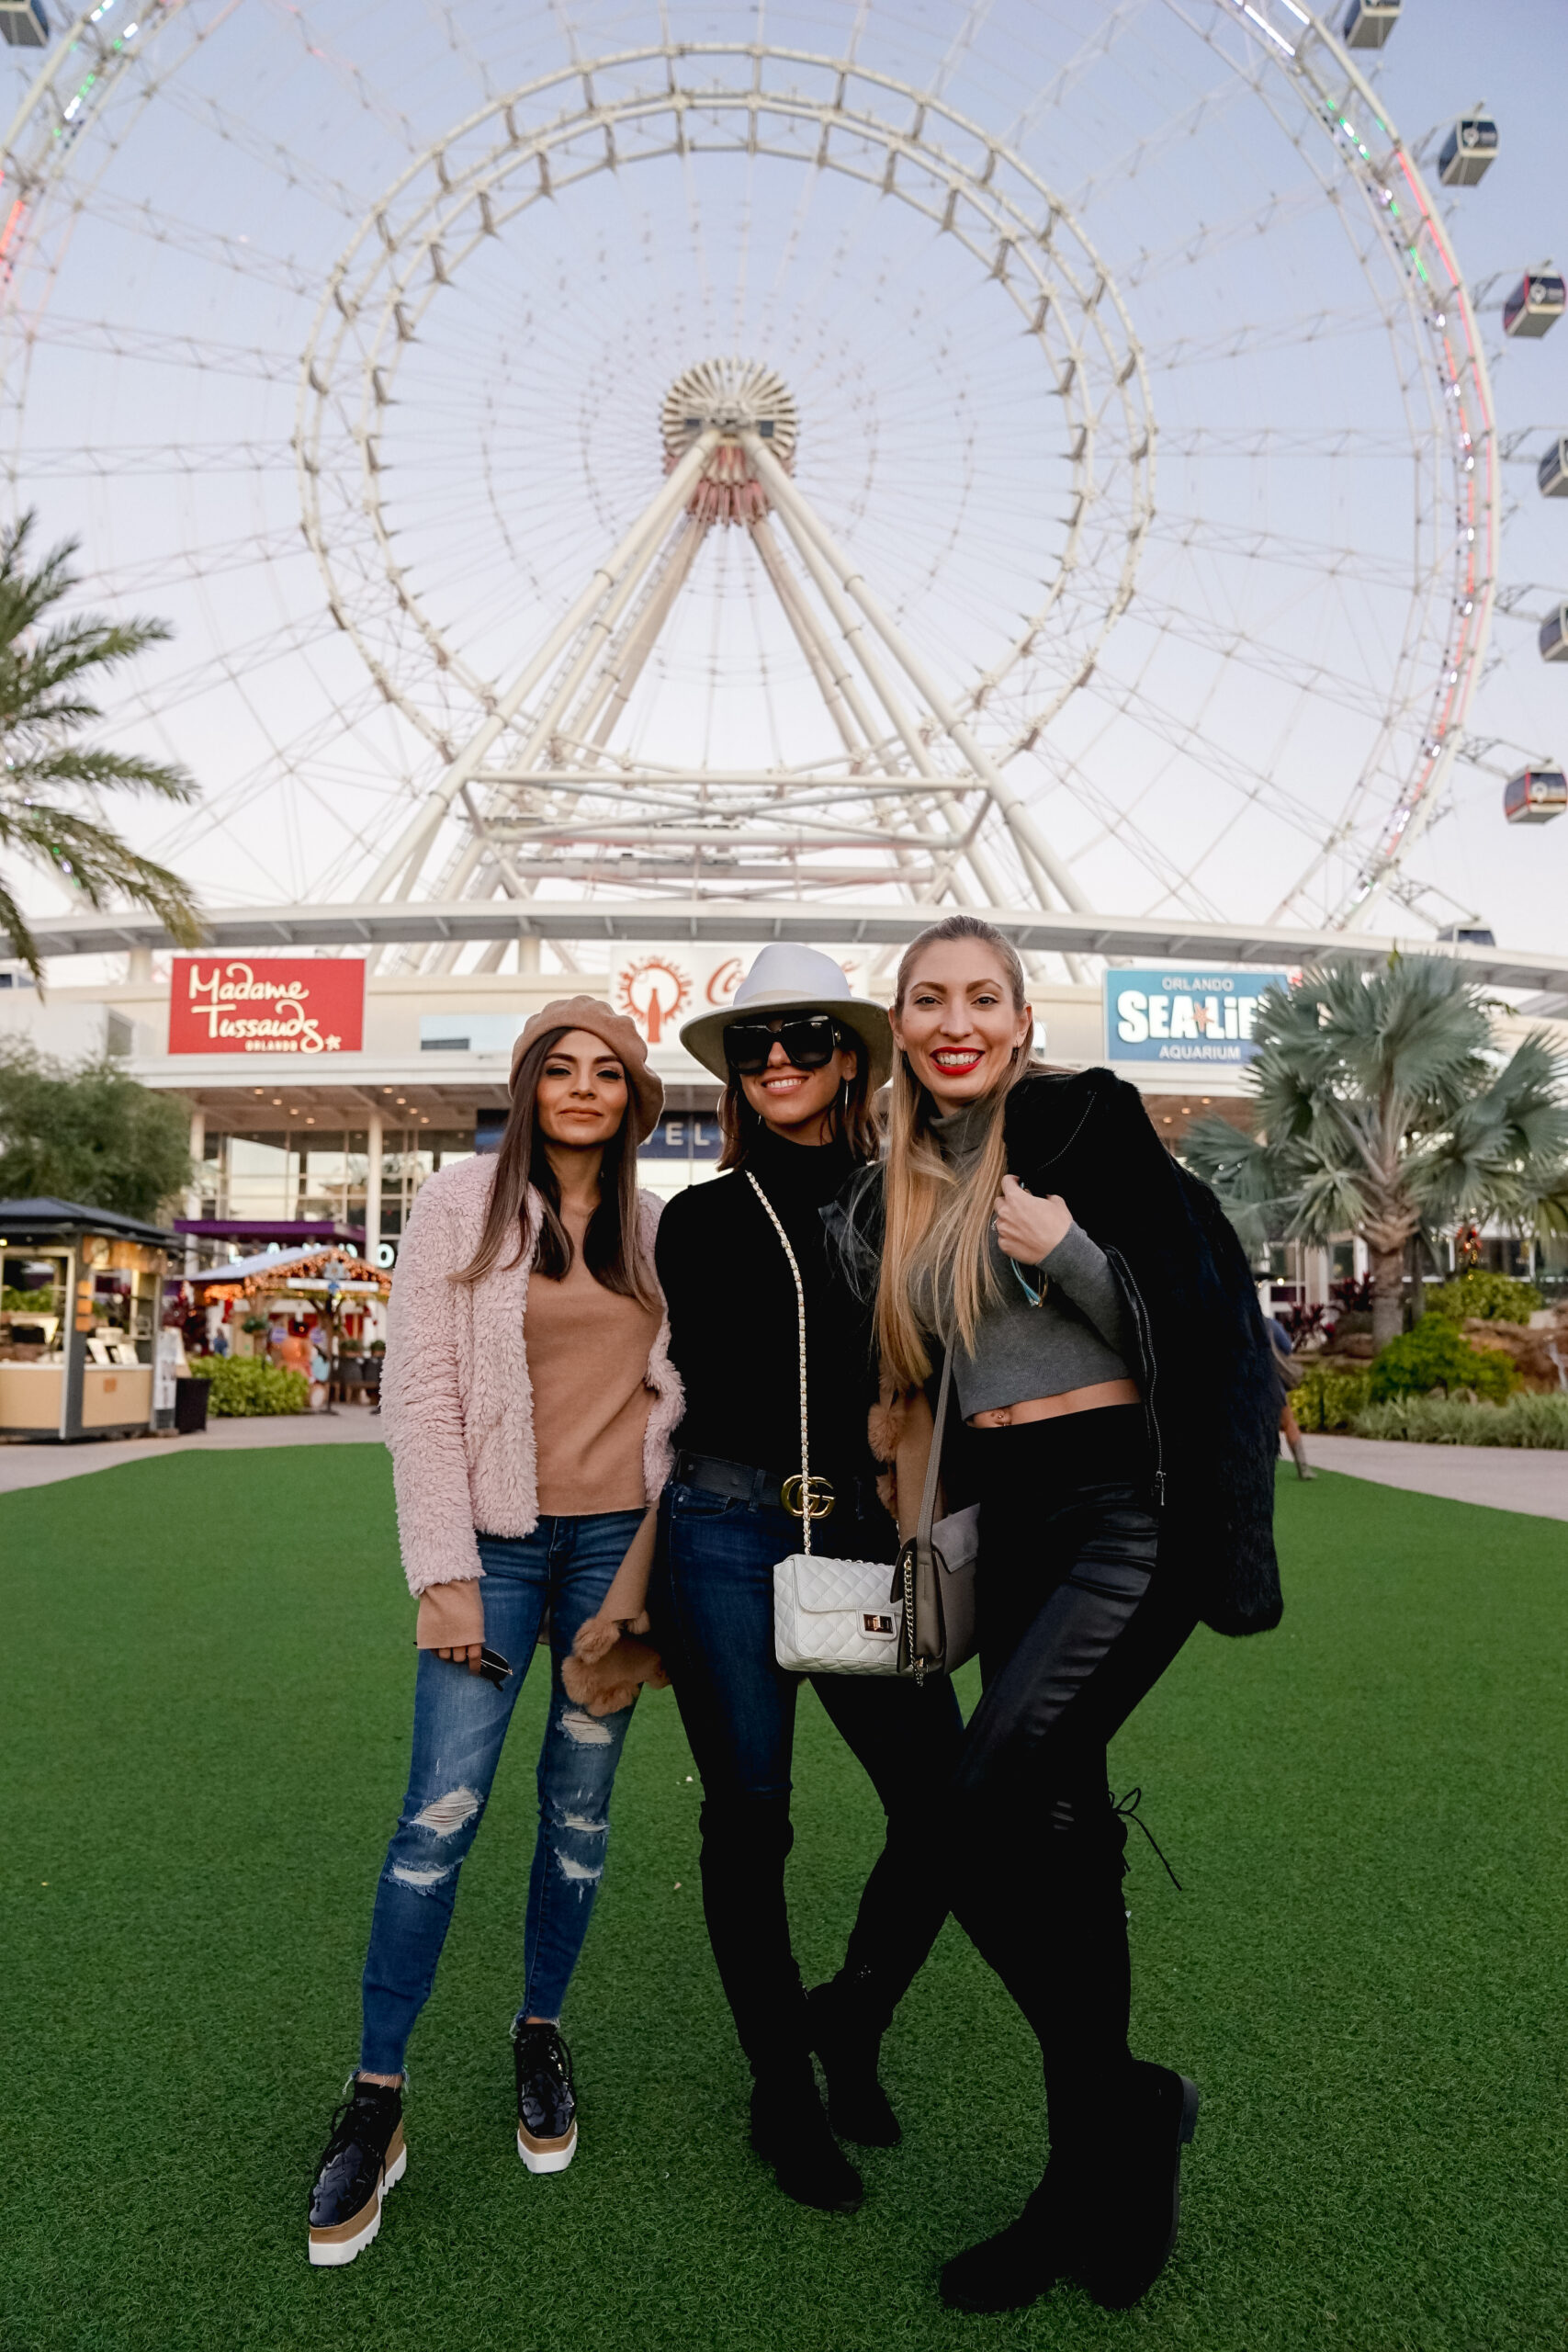 ORLANDO STAYCATION WITH THE GIRLS